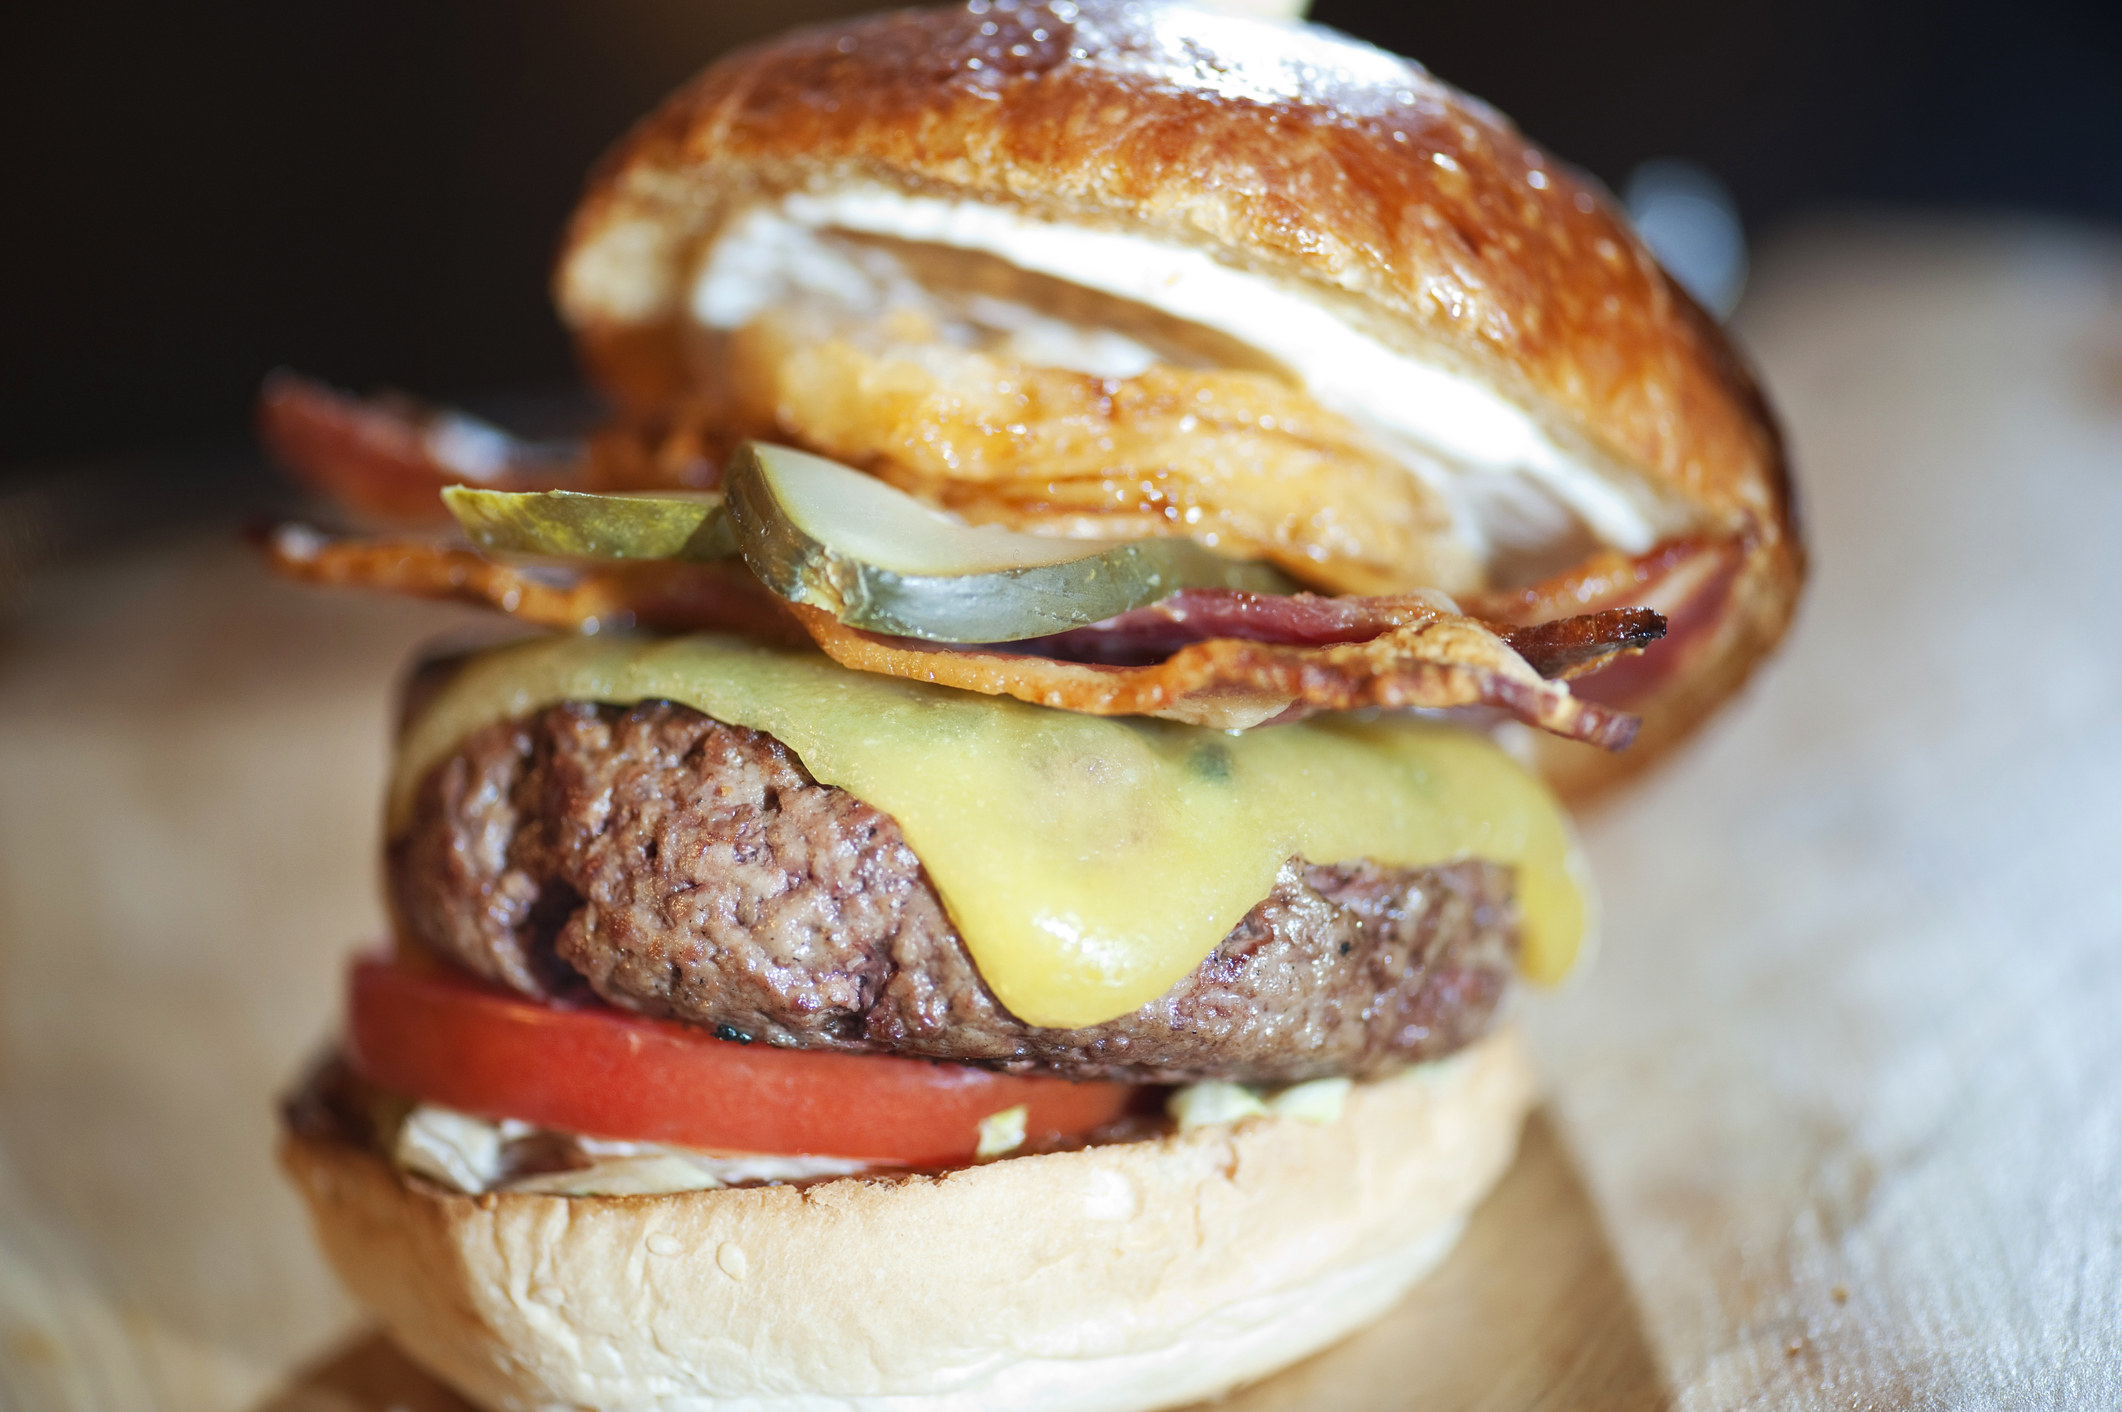 A thick hamburger with onion ring, bacon, tomatoes and pickle